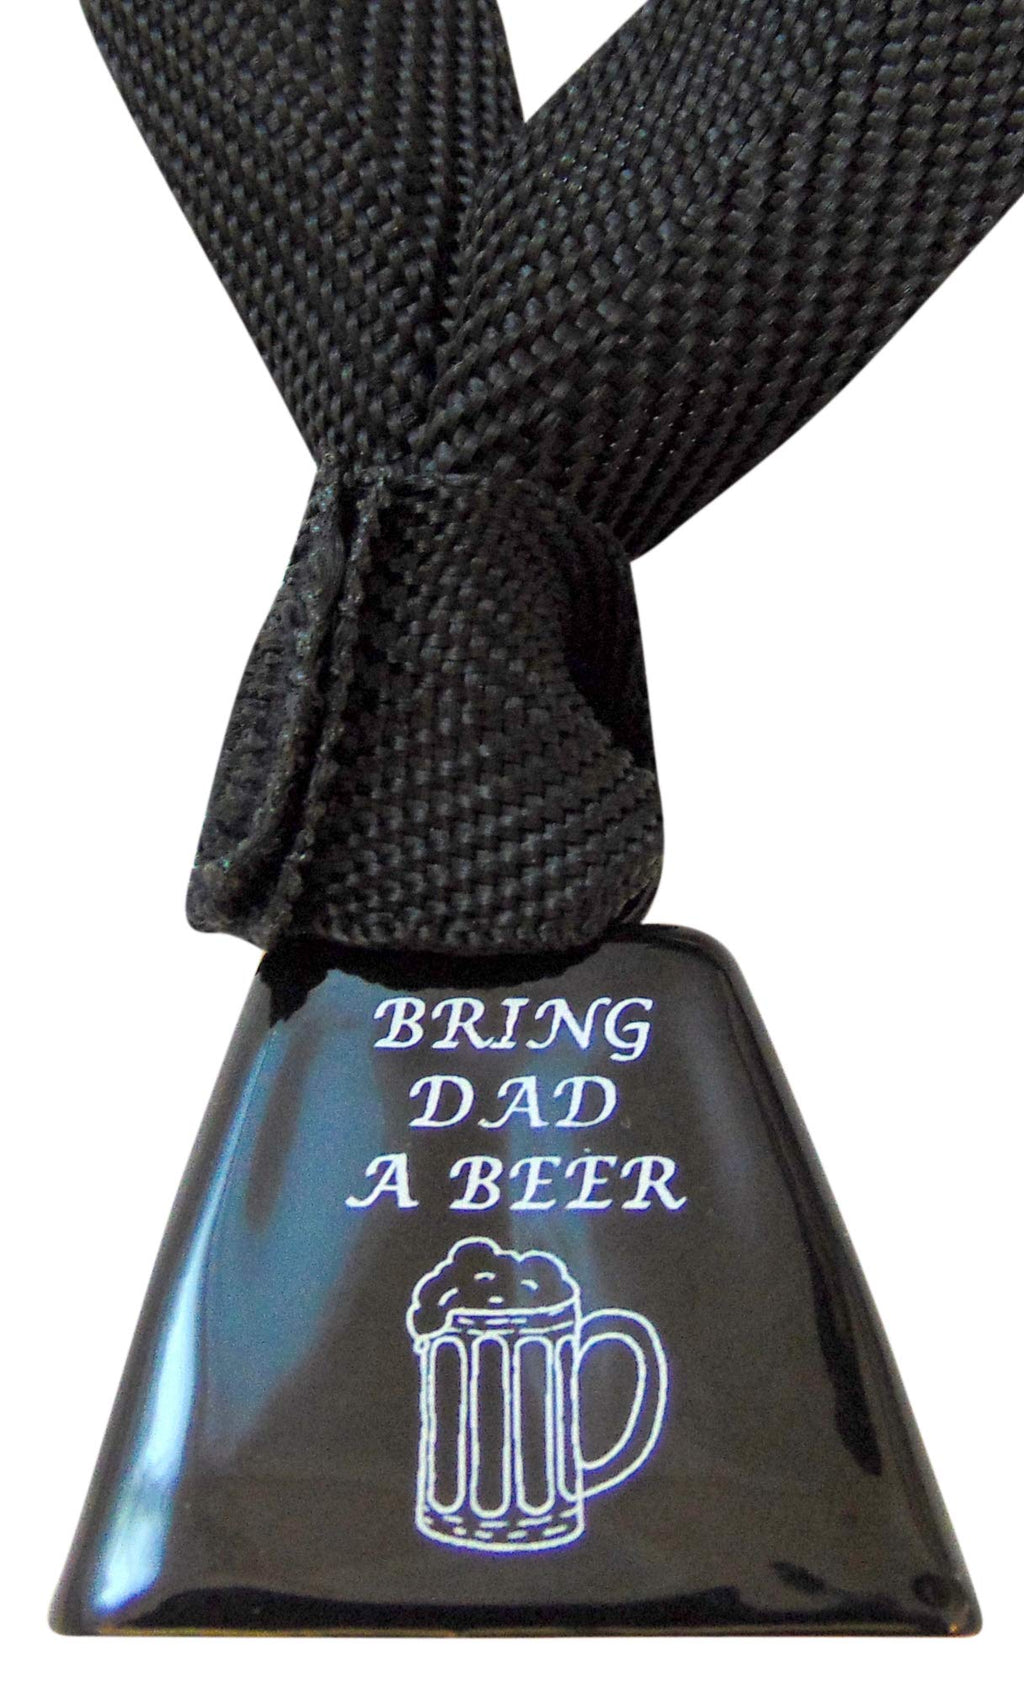 Bring Dad A Beer Cowbell Mini Brass Bell with Ribbon for Wearing or Christmas Tree Ornament Made in the USA, 2 Inches